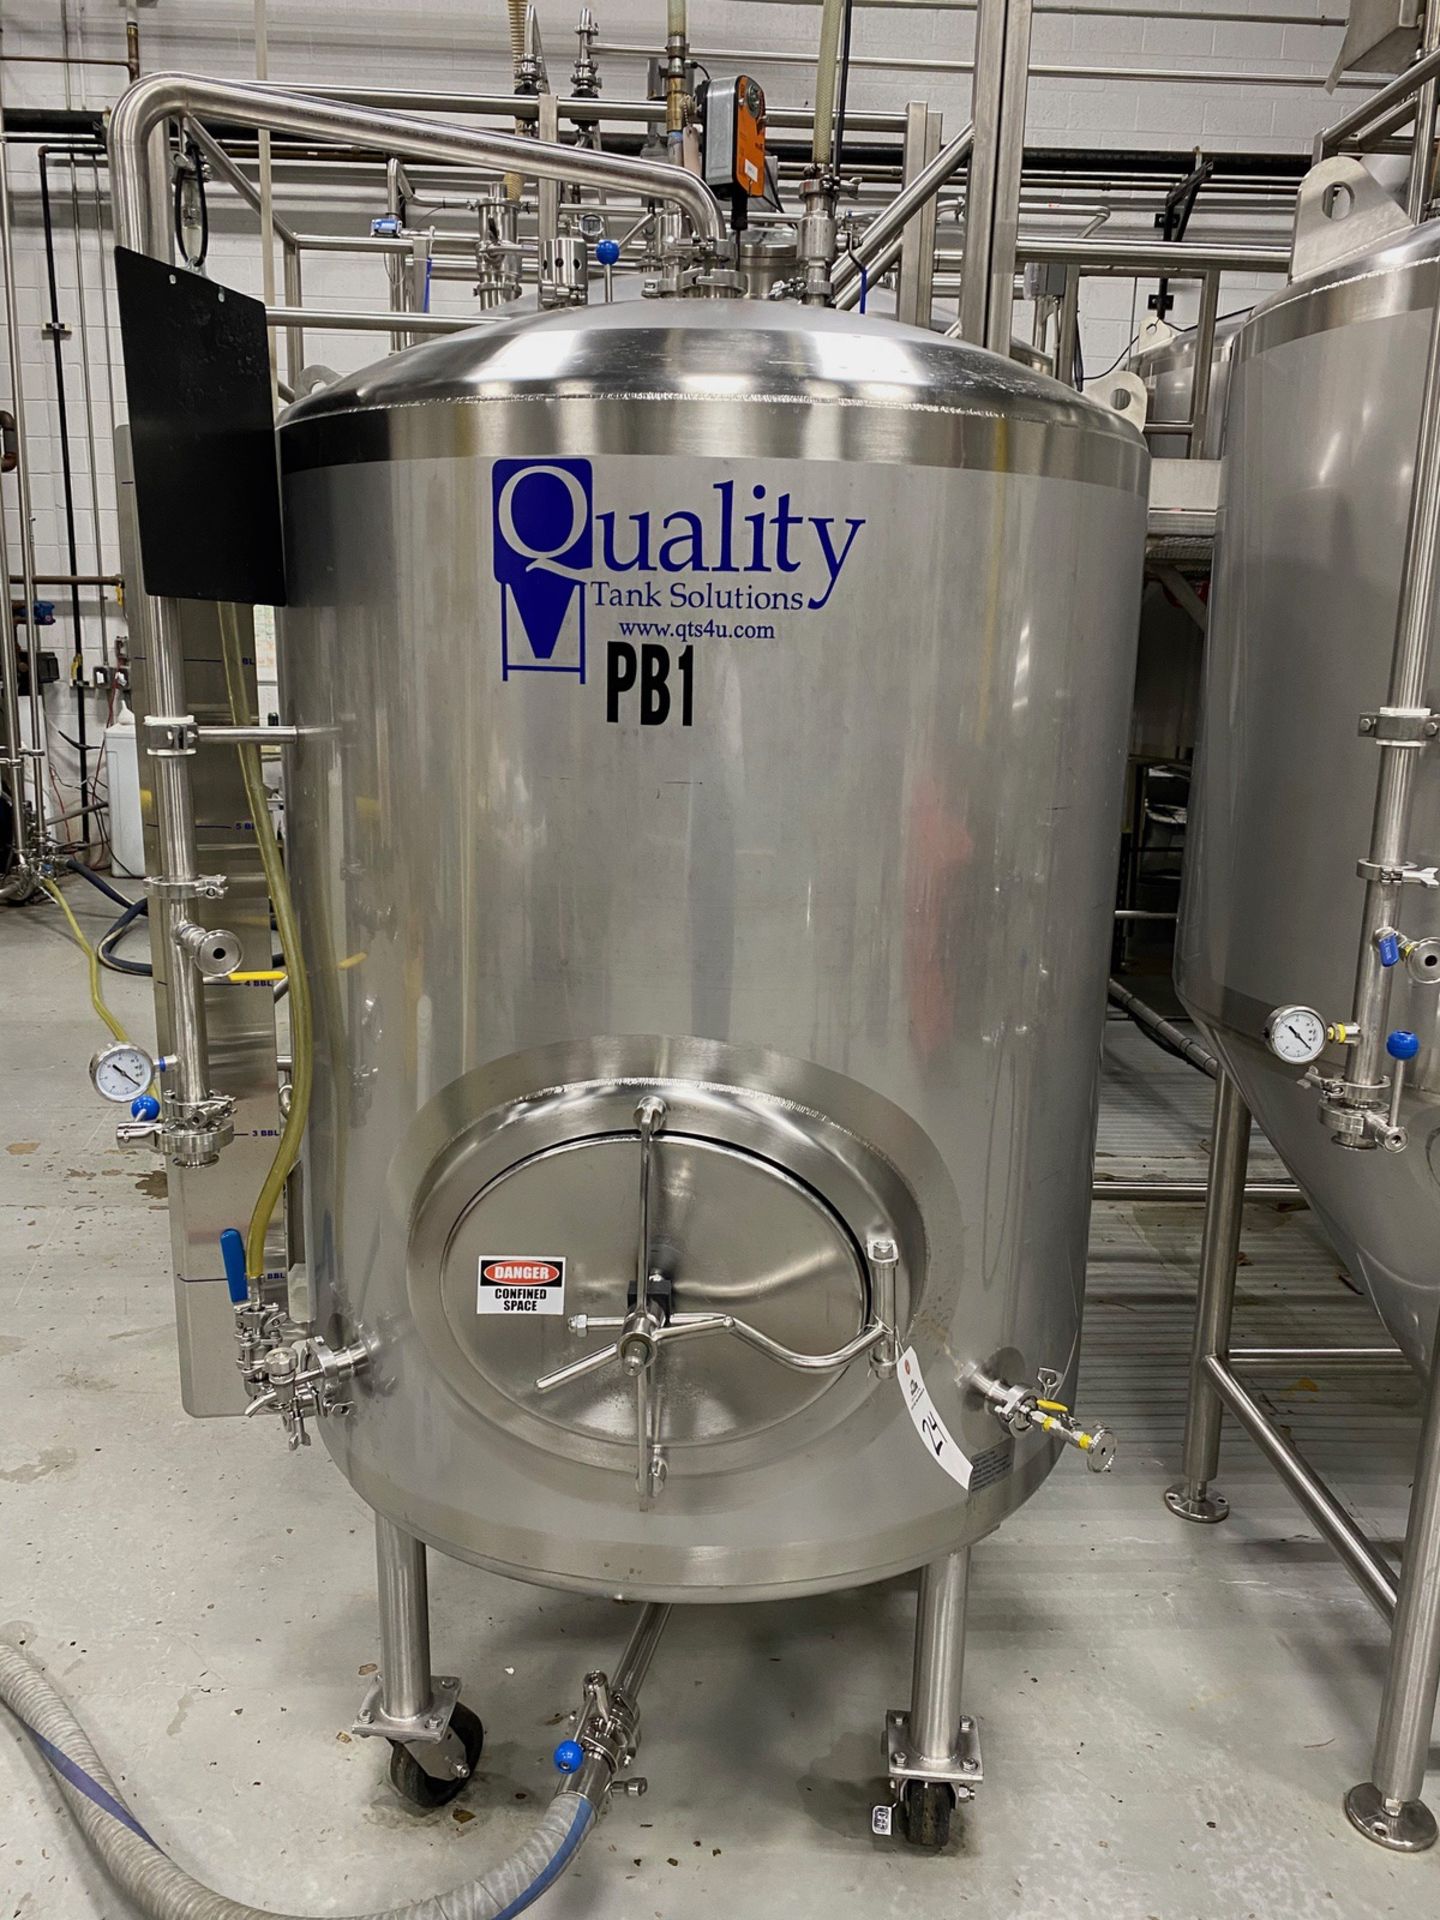 2015 Quality Tank 7 BBL Brite Tank, Glycol Jacketed, On Casters, - Subj to Bulks | Rig Fee: $350